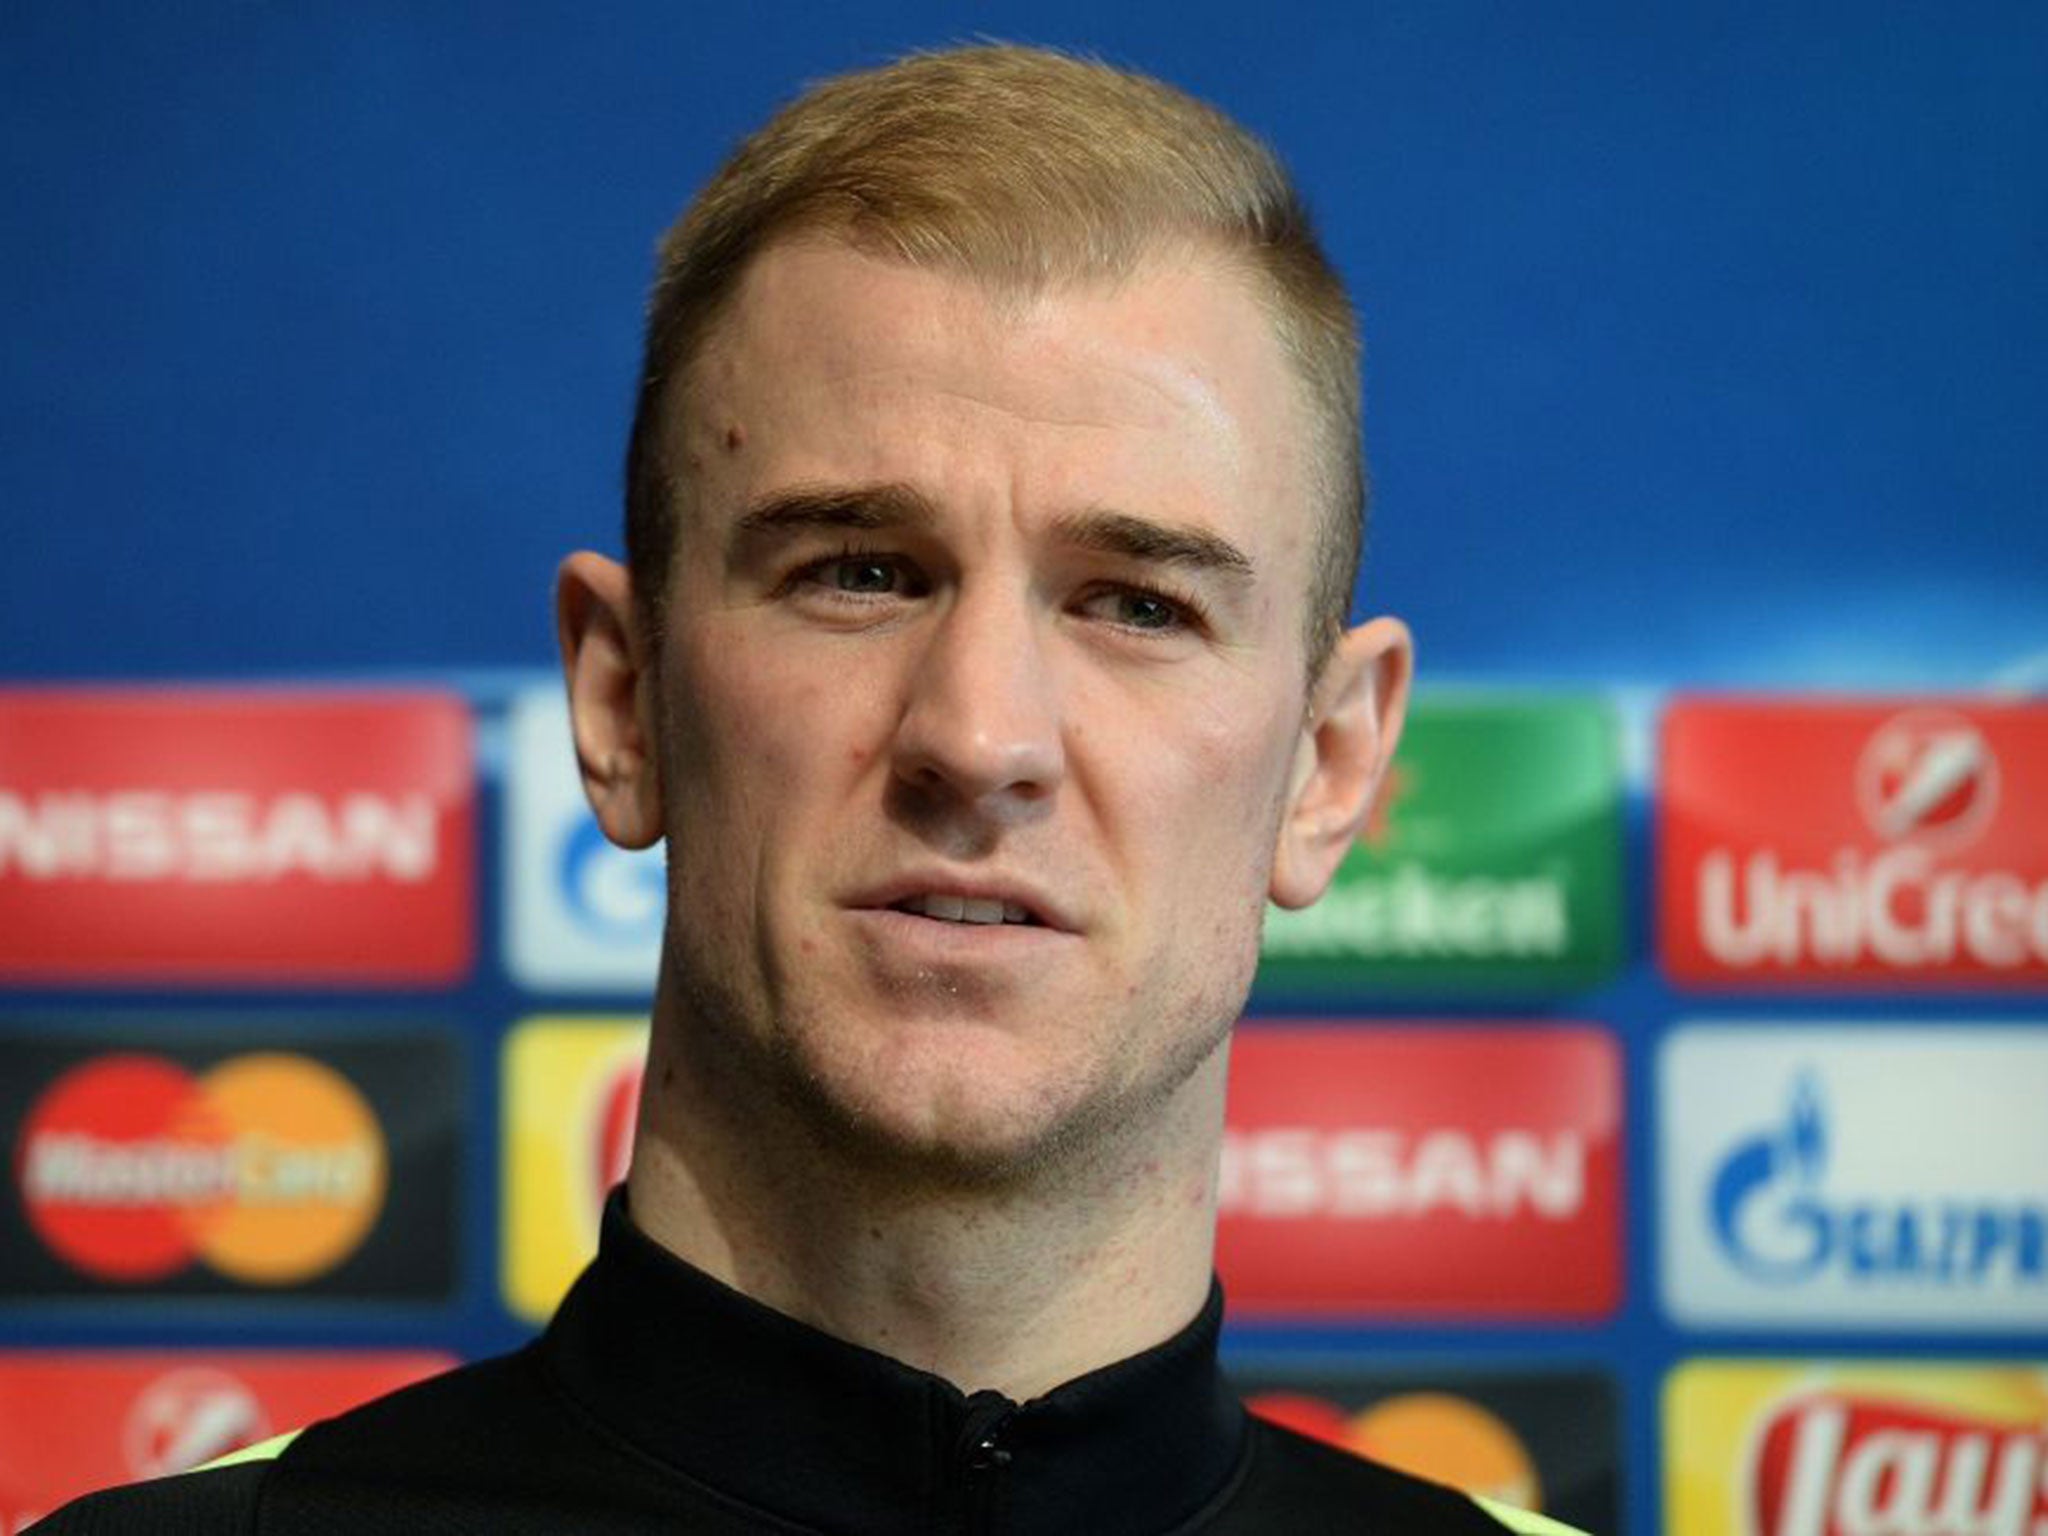 Joe Hart will miss England’s friendlies against Germany and the Netherlands with a calf injury